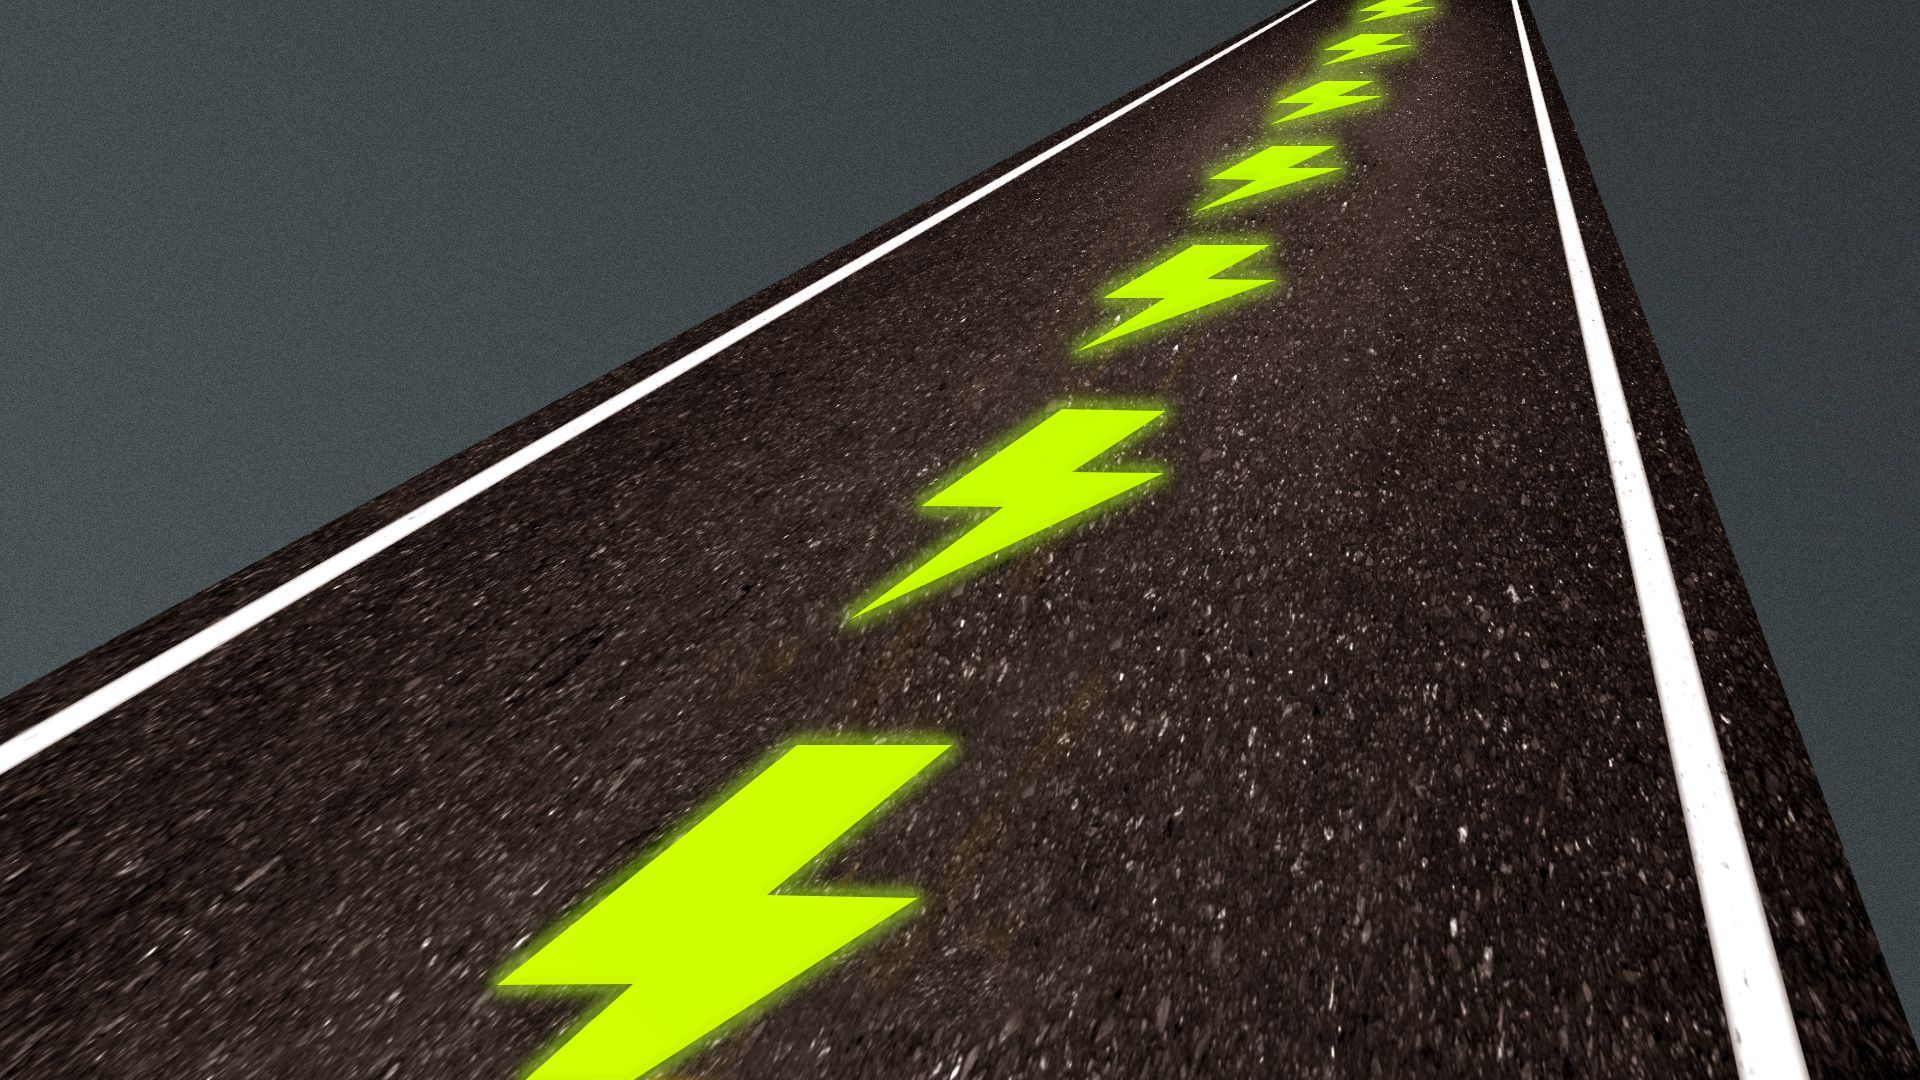 Illustration of a road with glowing electricity symbols dividing the lanes.